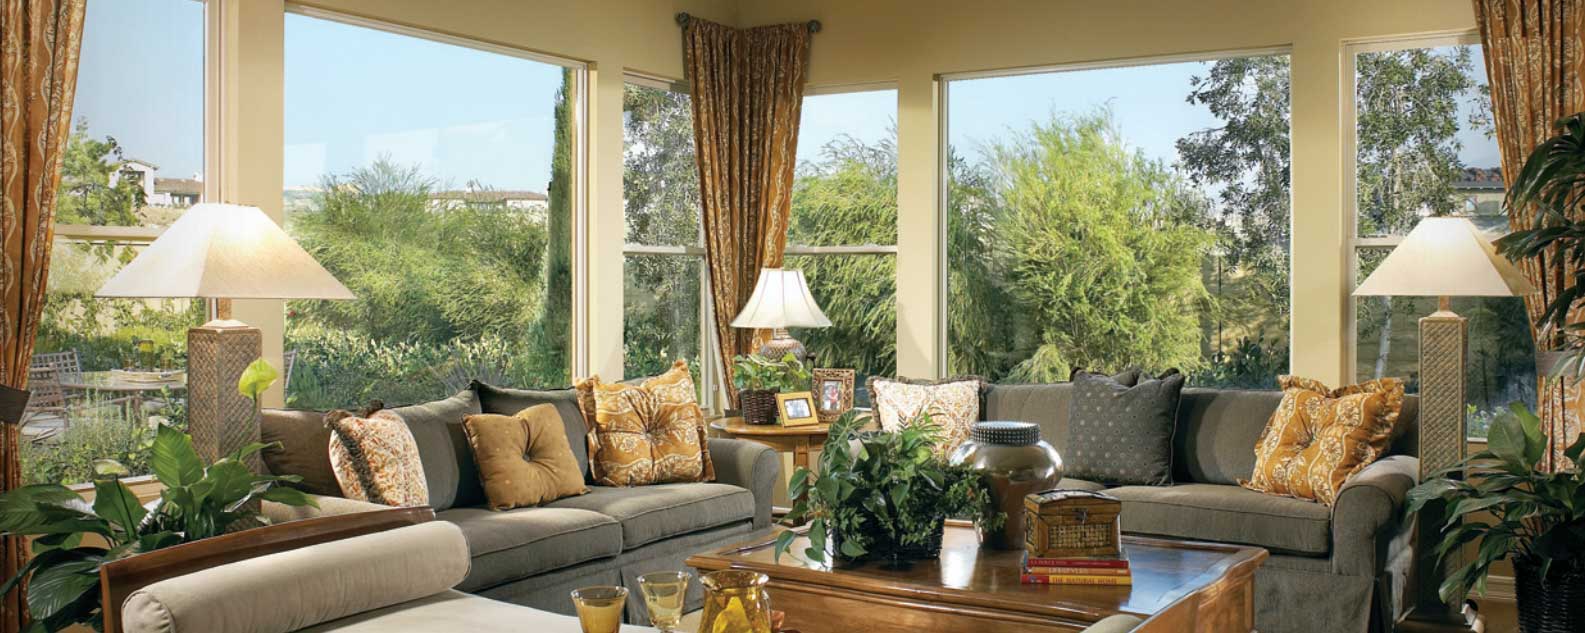 6 Tips to Smart Window Buying Choices for Your Home